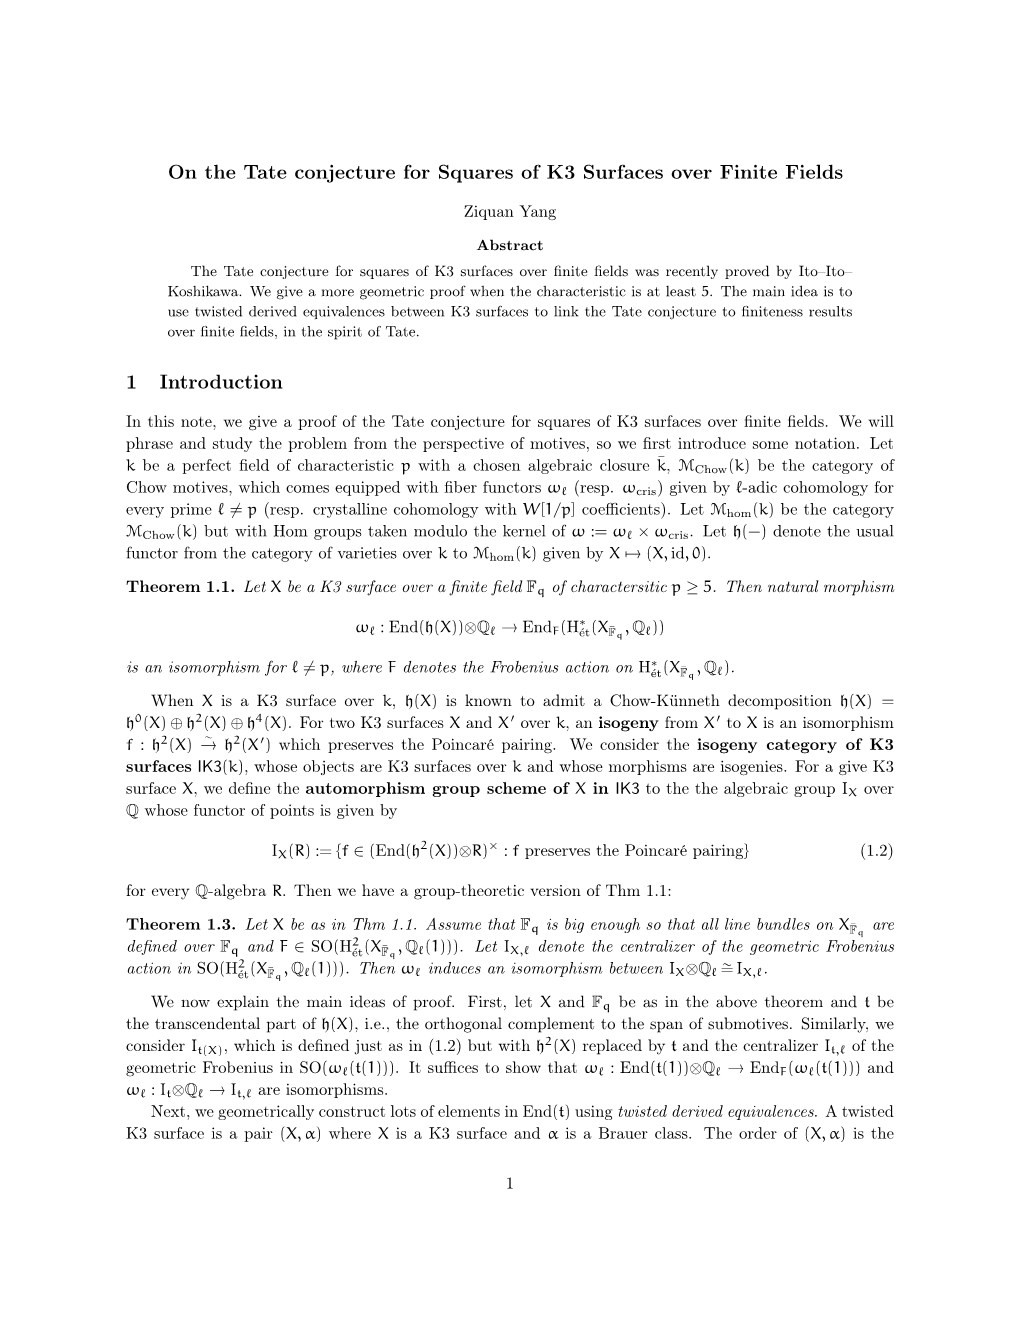 On the Tate Conjecture for Squares of K3 Surfaces Over Finite Fields